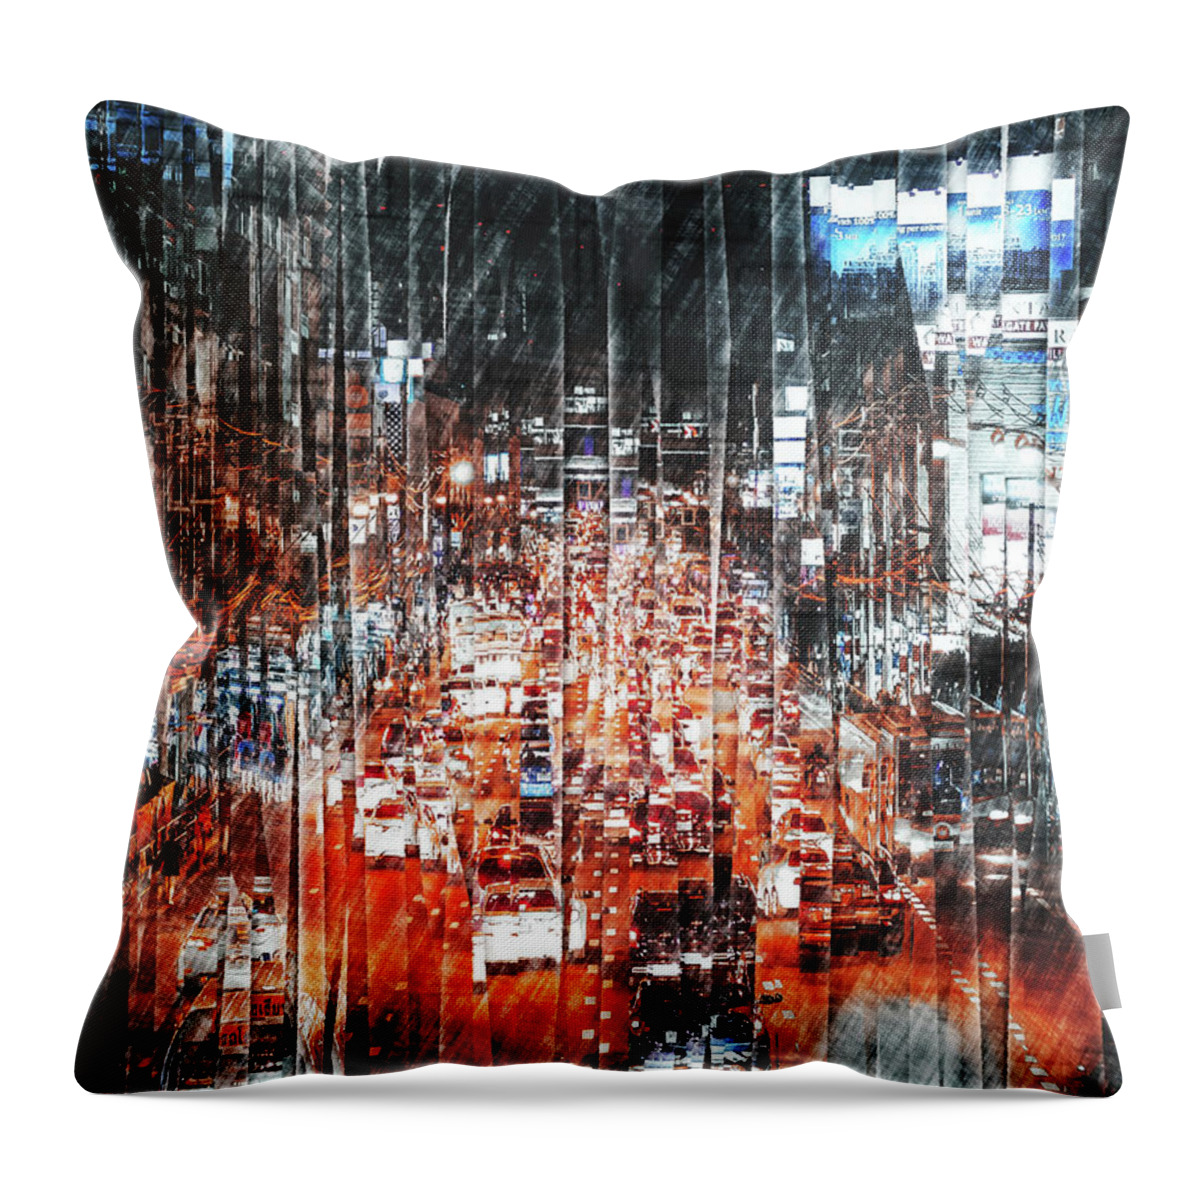 Traffic Throw Pillow featuring the digital art City Traffic by Phil Perkins